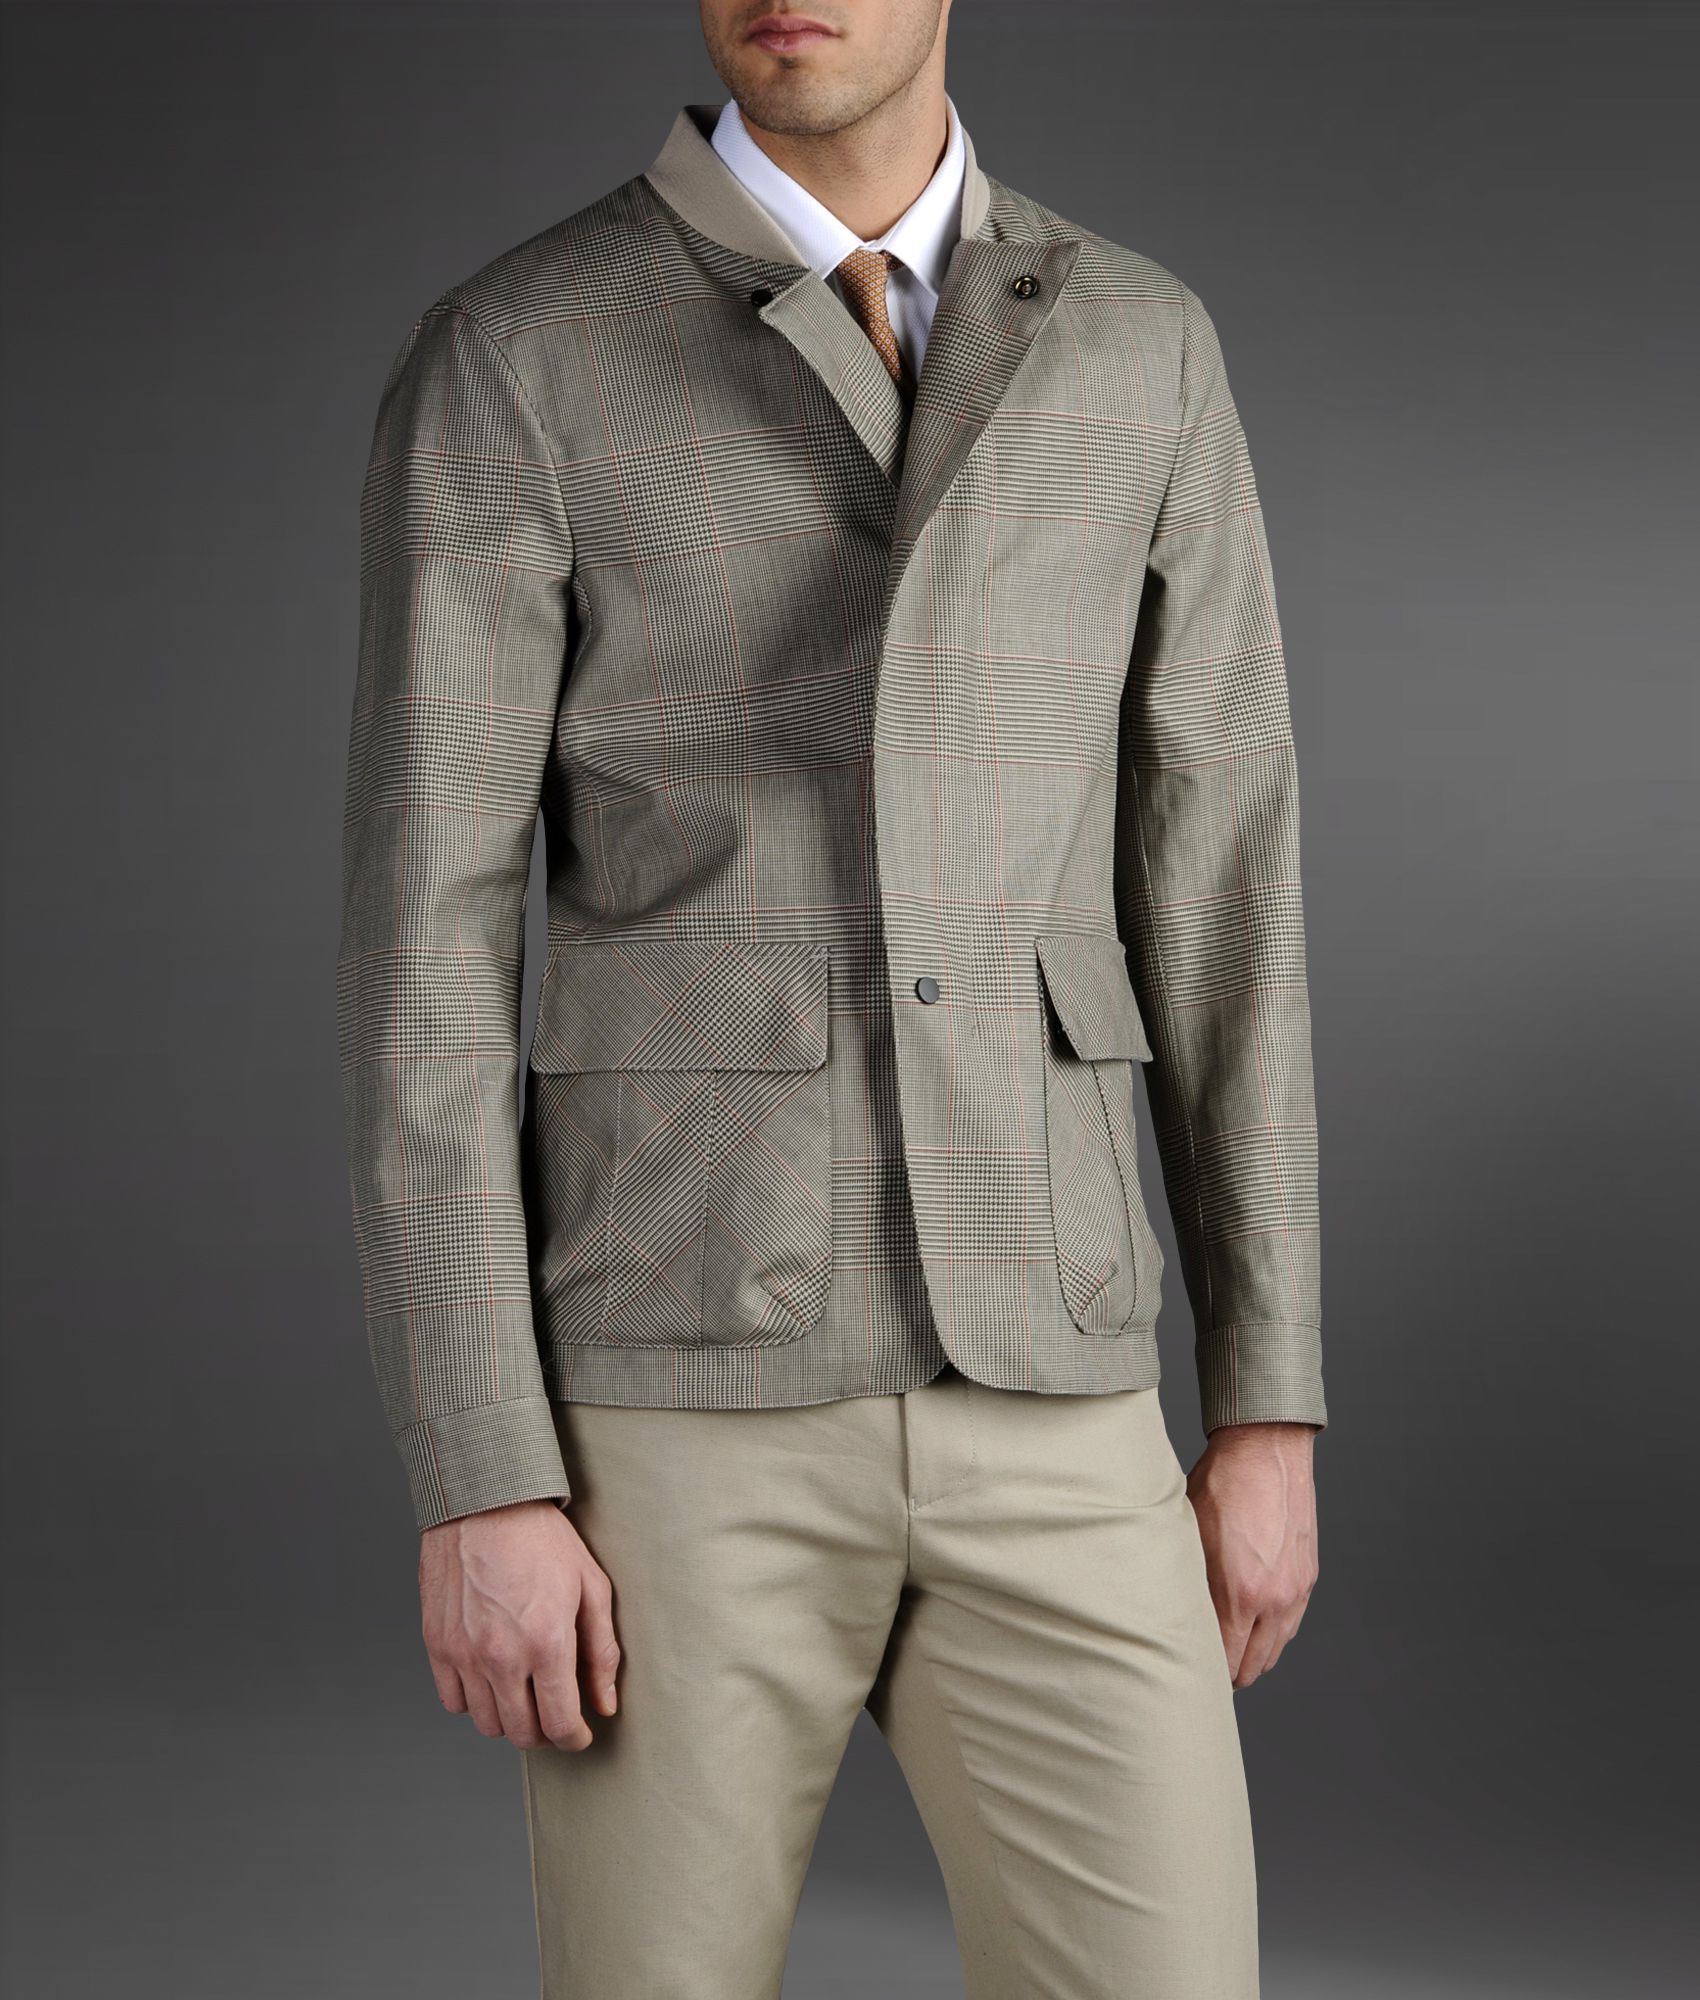 Lyst - Emporio Armani Two Buttons Jacket in Gray for Men